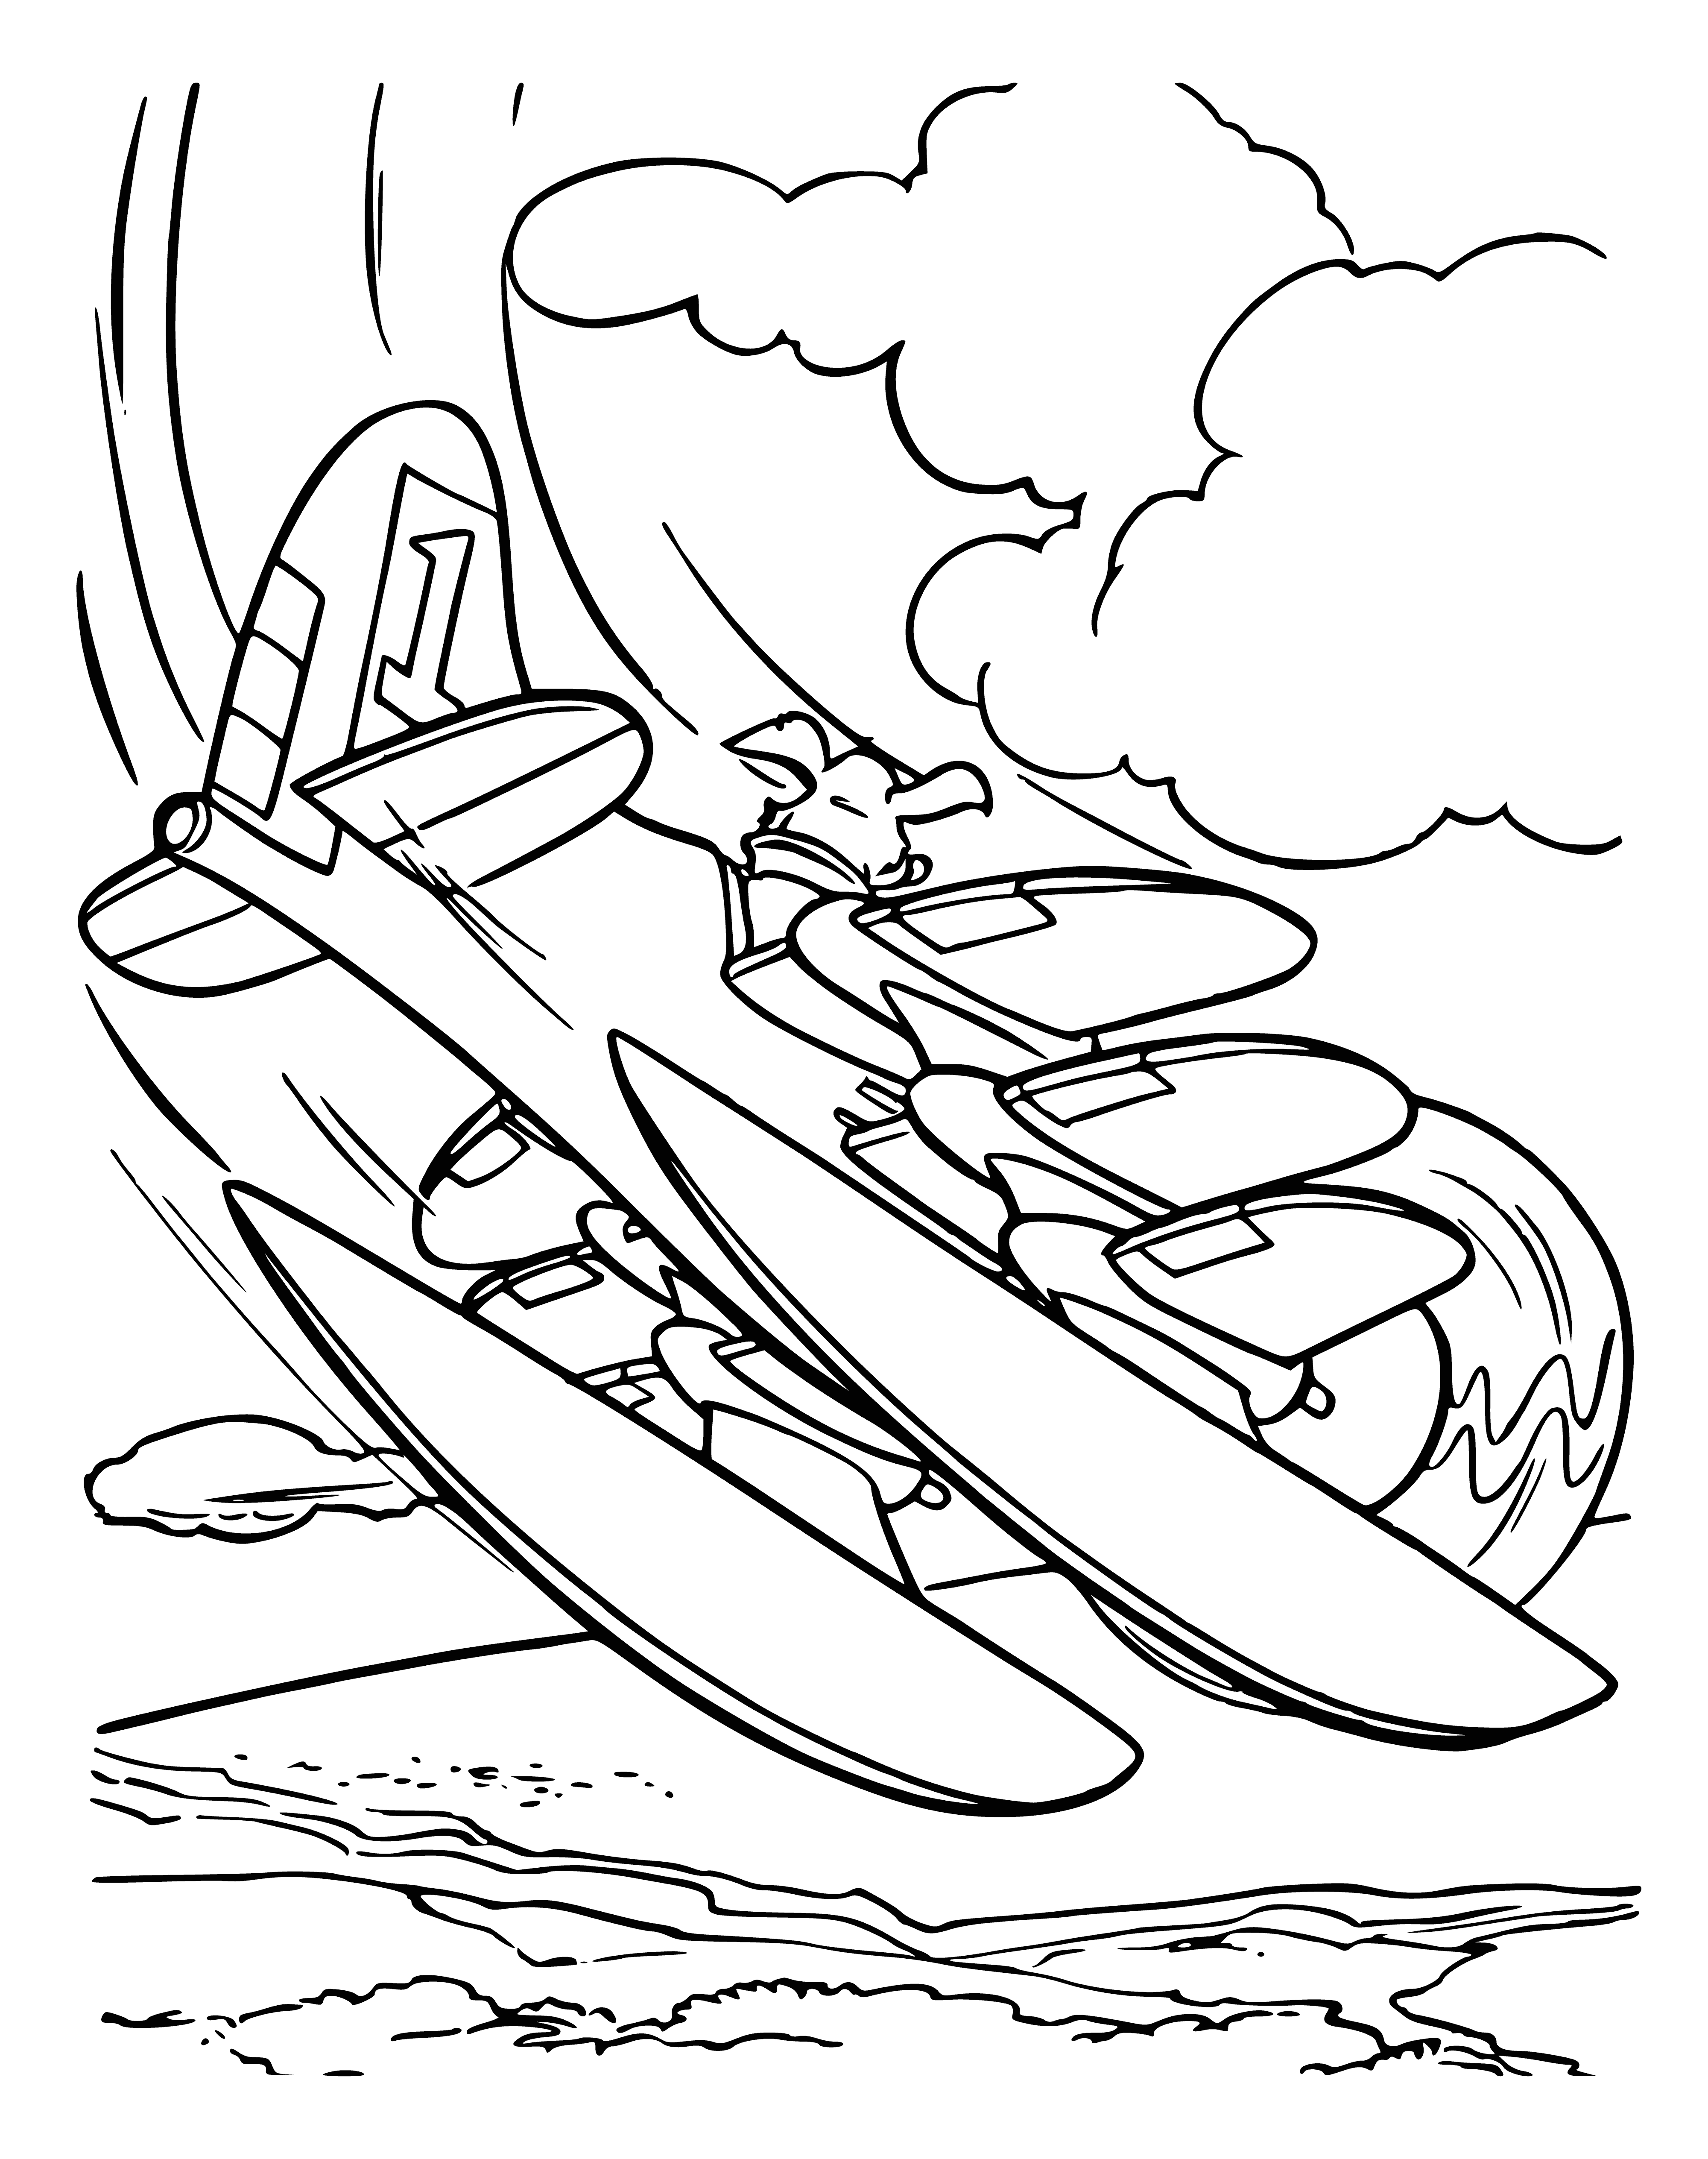 Don Carnage's plane coloring page